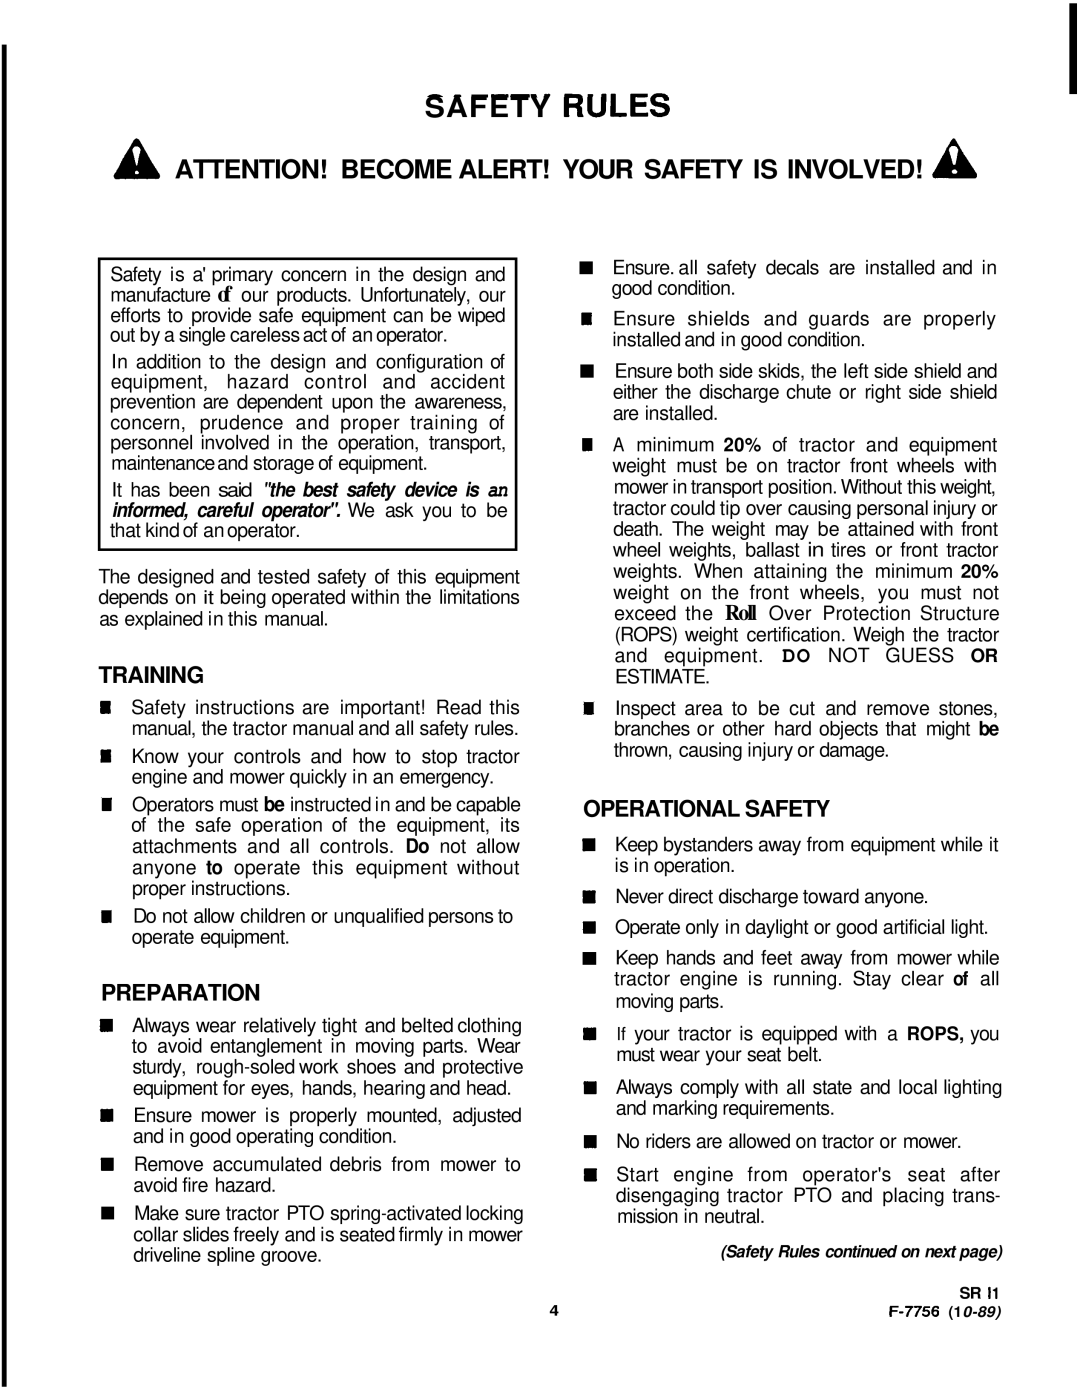 Honda Power Equipment RM752A manual Your Safety Is Involved! A, A Attention! Become Alert, Training, Preparation 